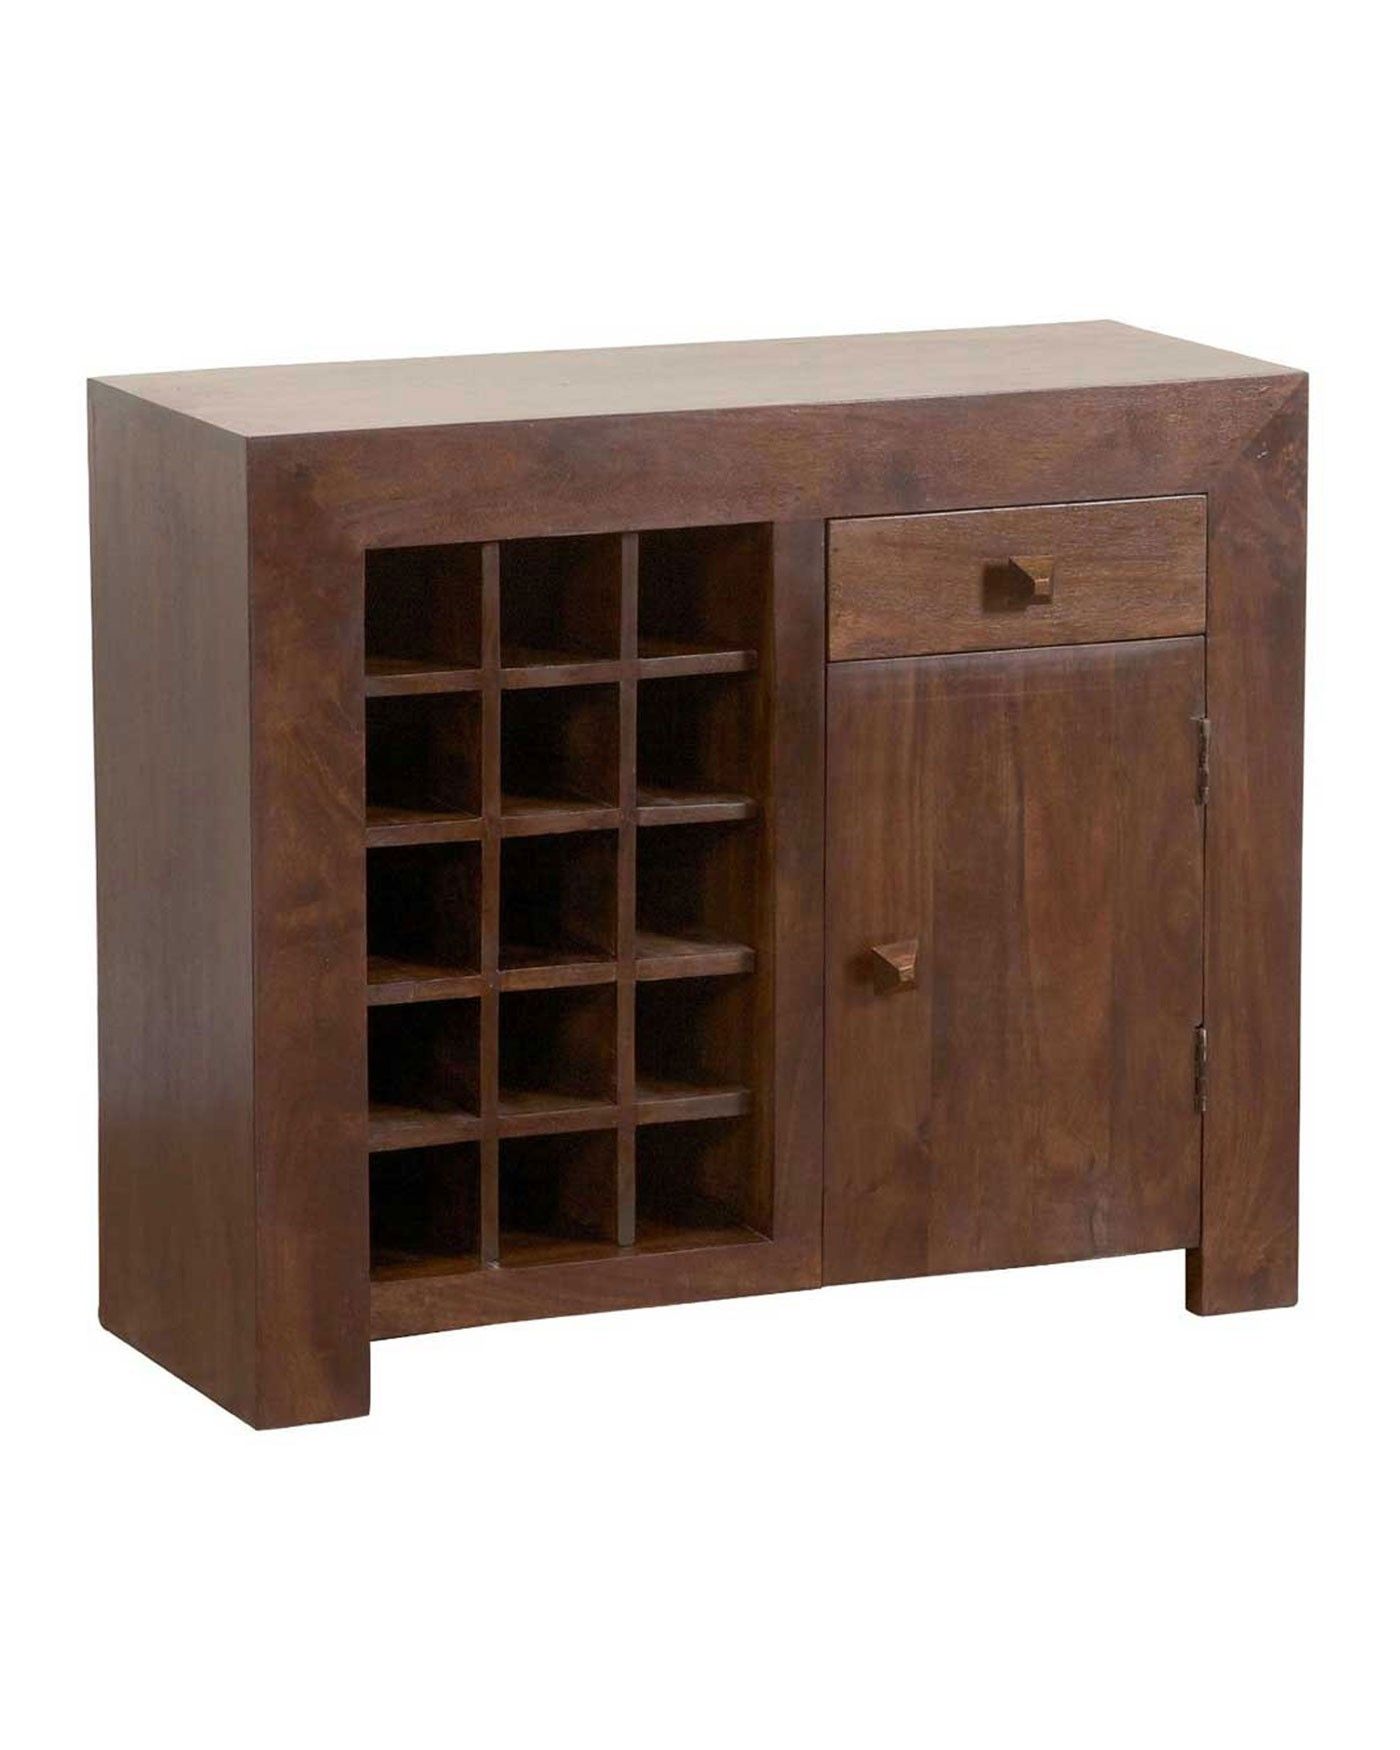 Dakota Sideboard With Wine Rack Dark Shade – Homescapes In Most Recently Released Bale Rustic Grey Sideboards (View 8 of 20)